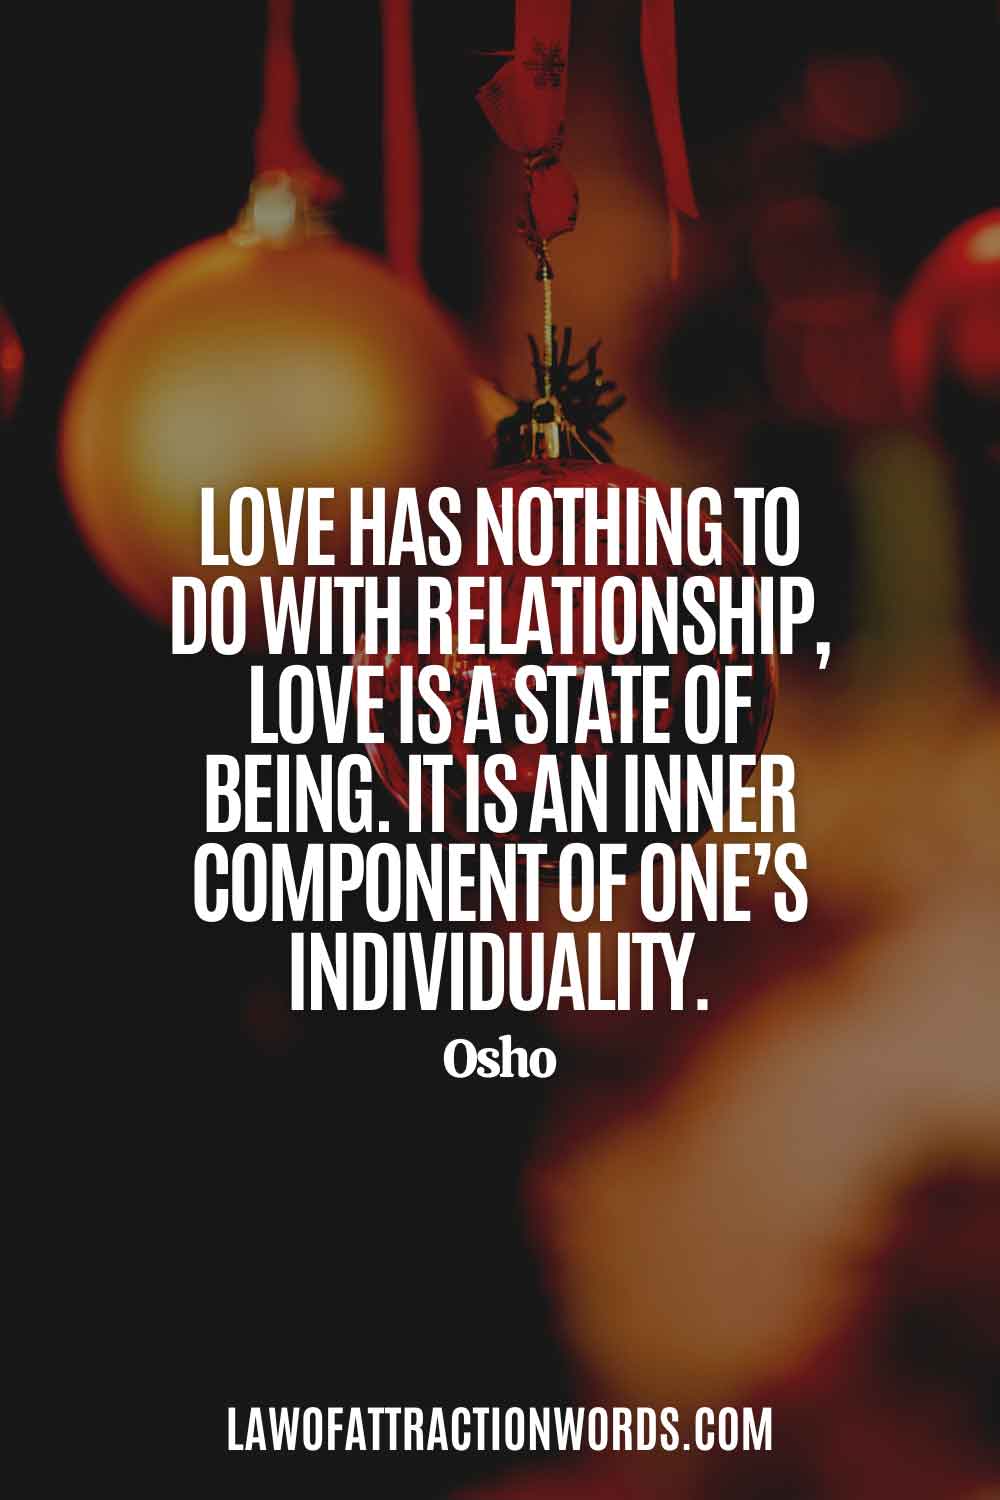 Osho Quotes On Love and Relationships